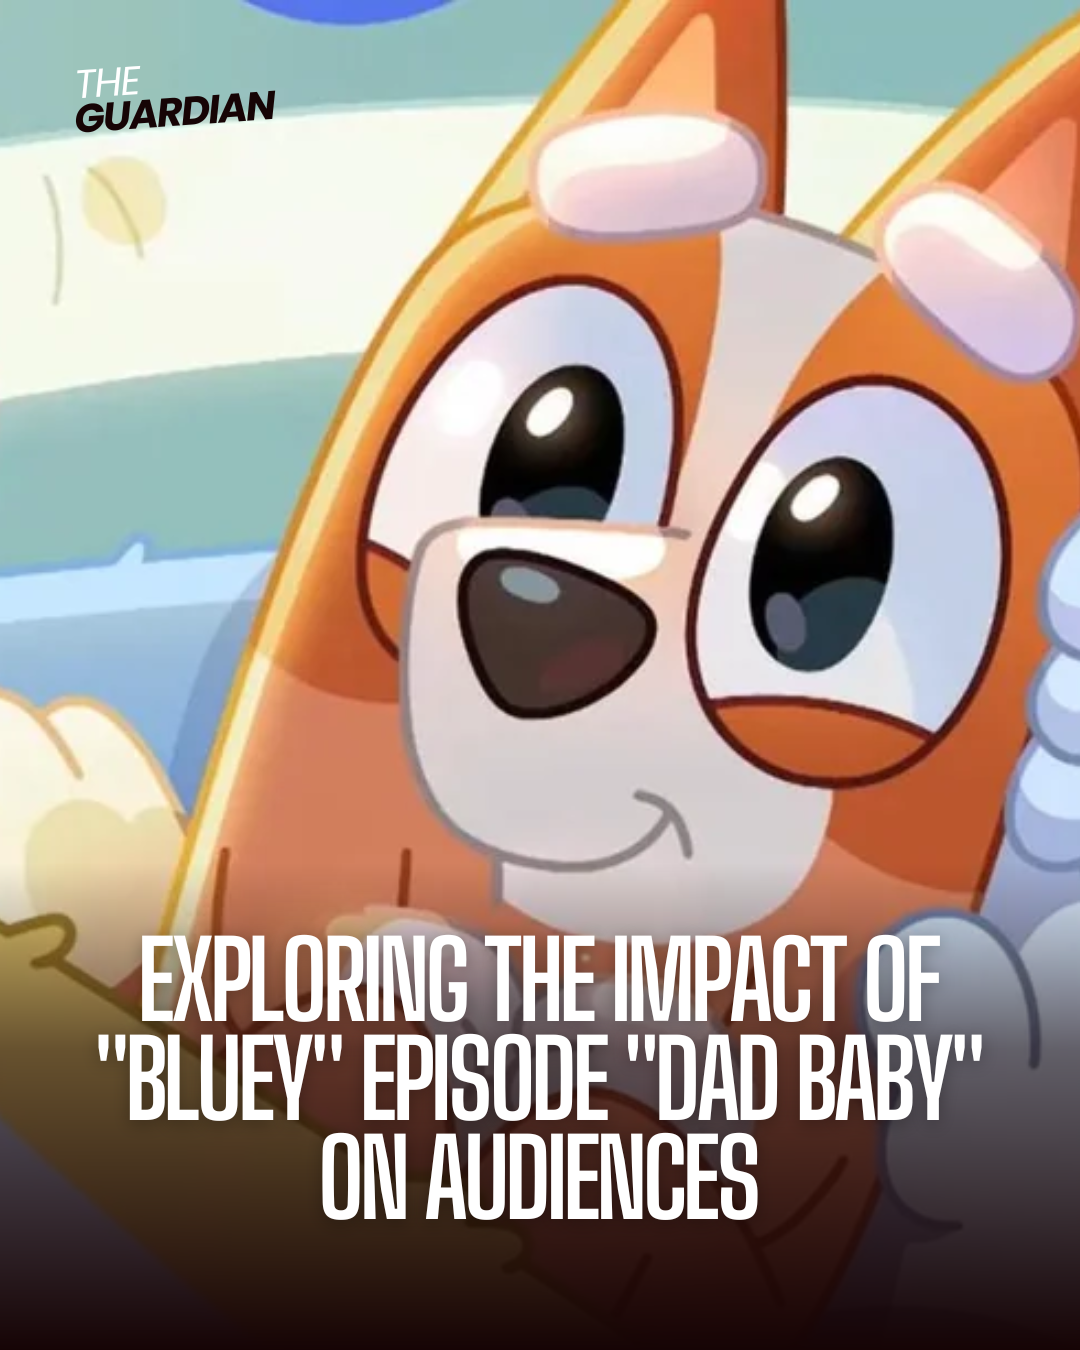 Bluey has won over fans worldwide with its lovable characters and innovative stories.